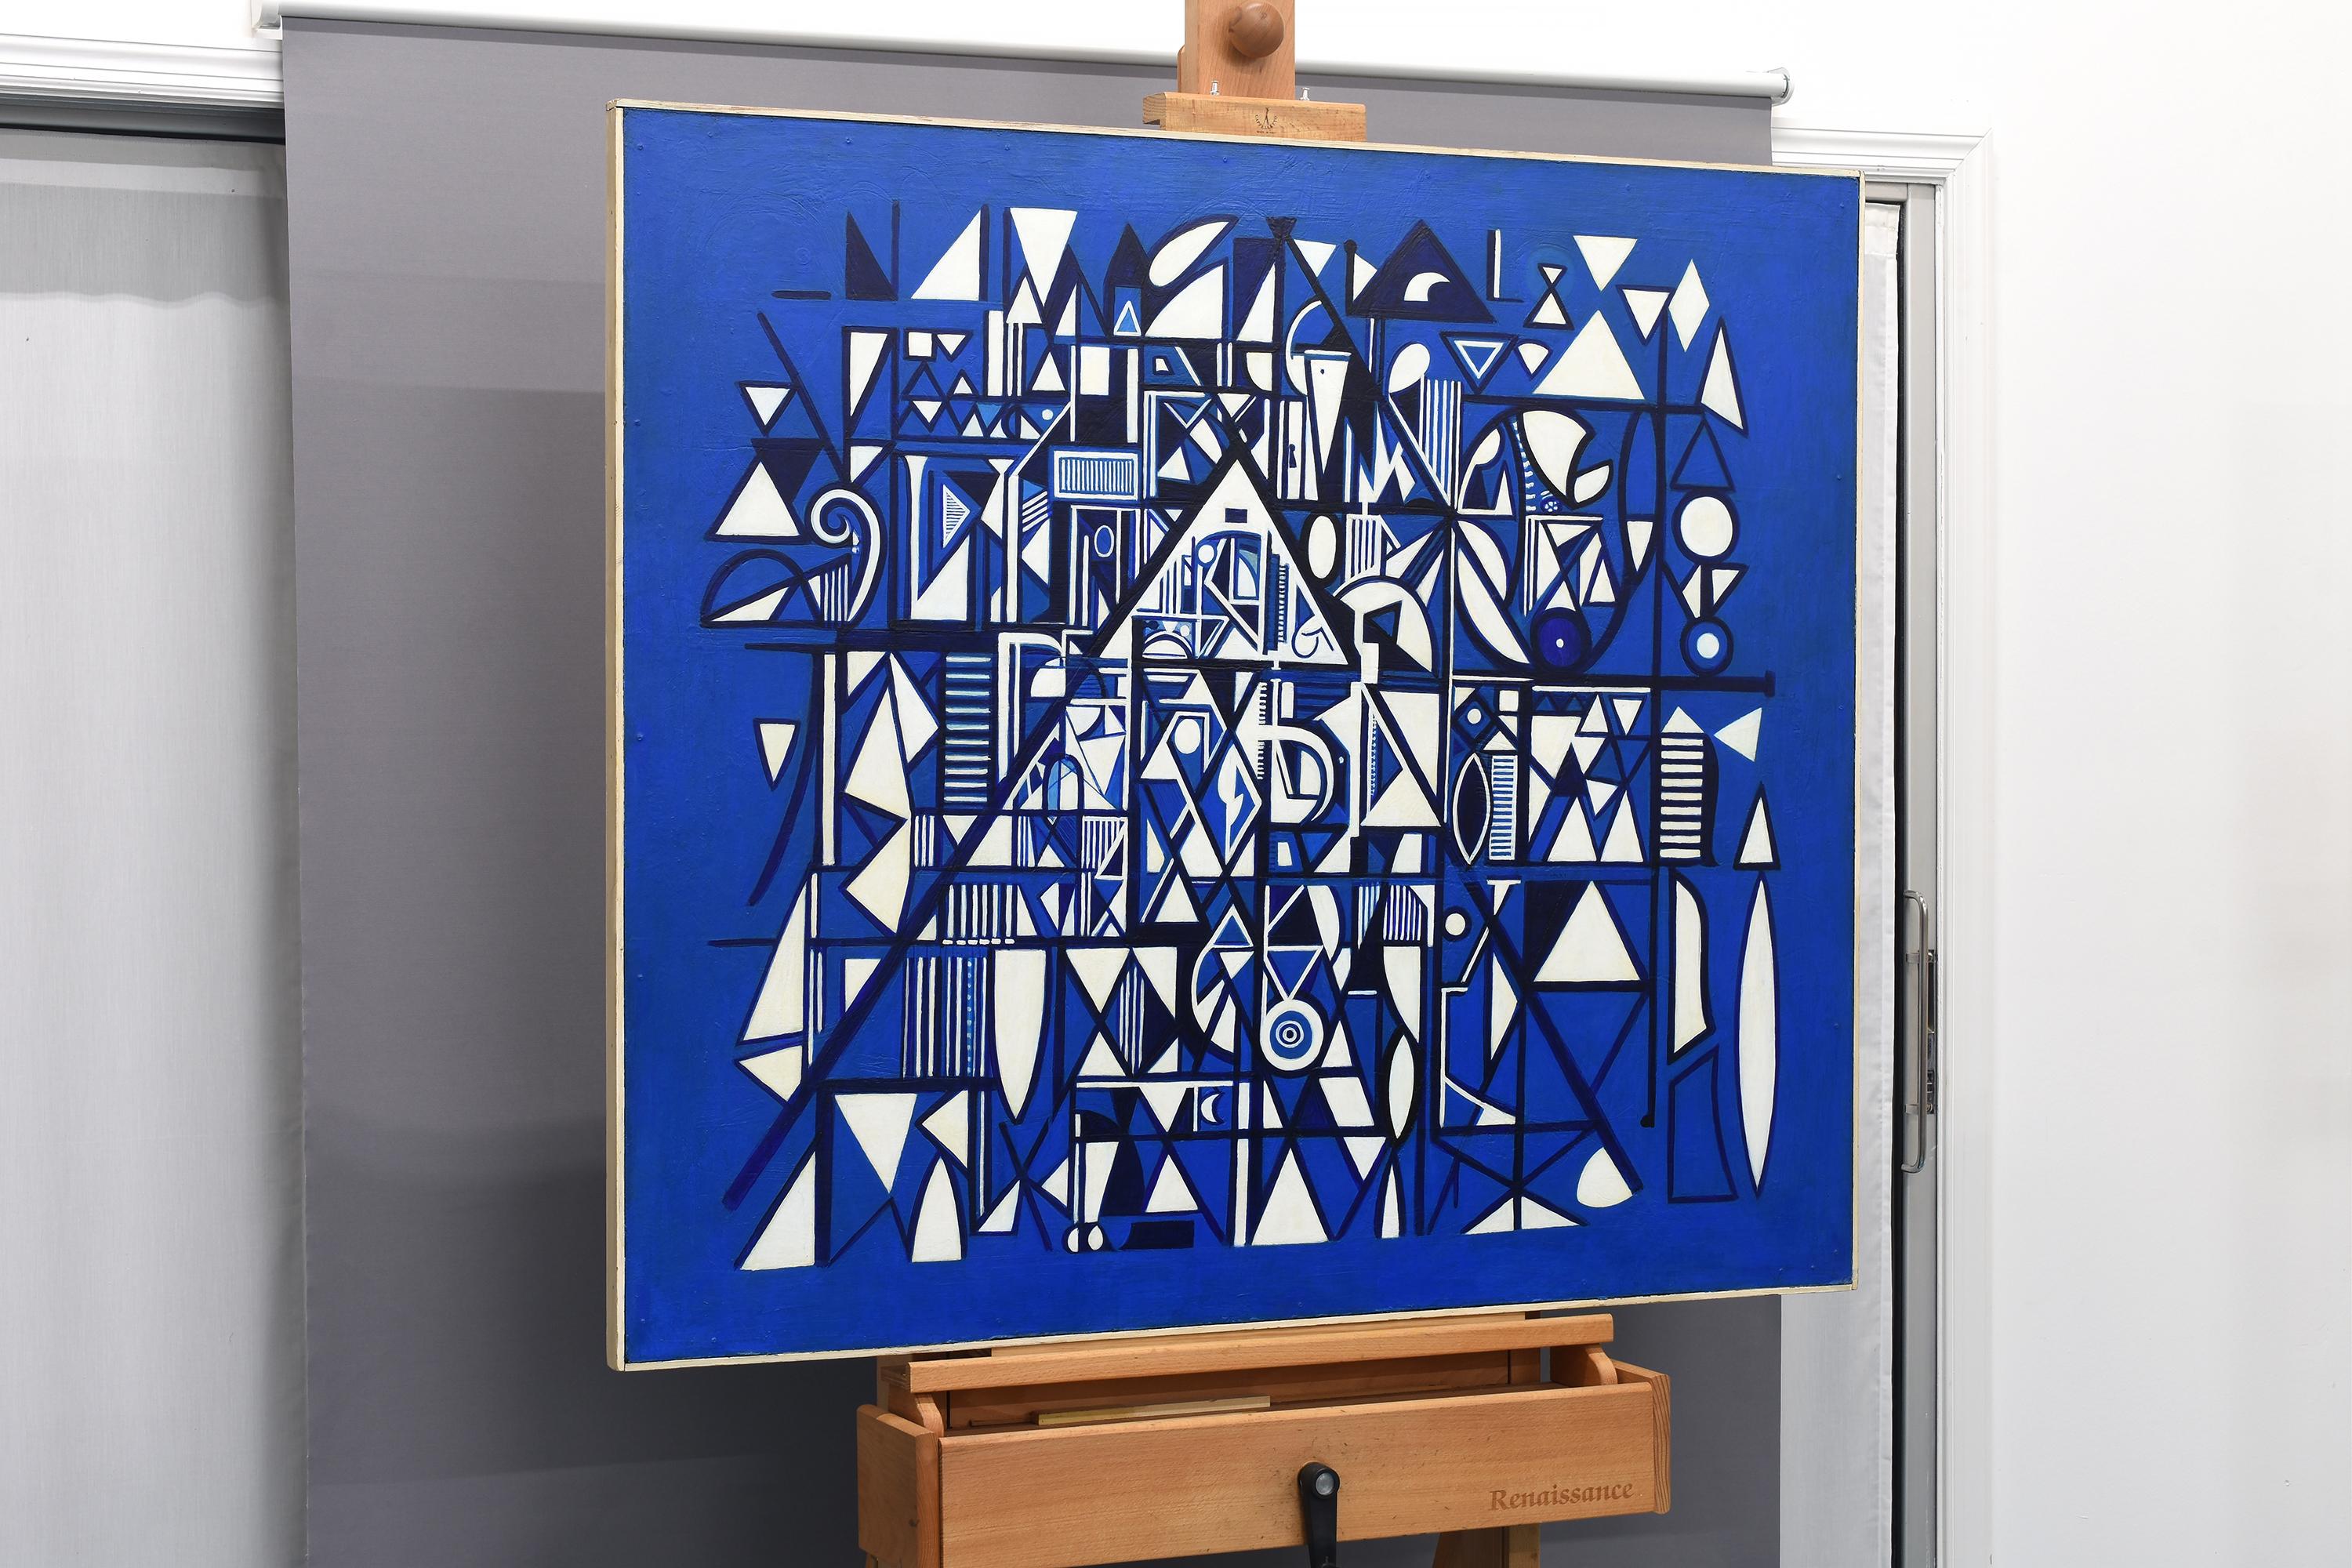 Acrylic on masonite.  This is a pivotal work in deep and radiant cobalt blue from 1950.  It dipicts calligraphic and hieroglyph structures over a grid and pyramidal base by the  first generation abstract expressionist. 
  
Provenance:  Skinner: